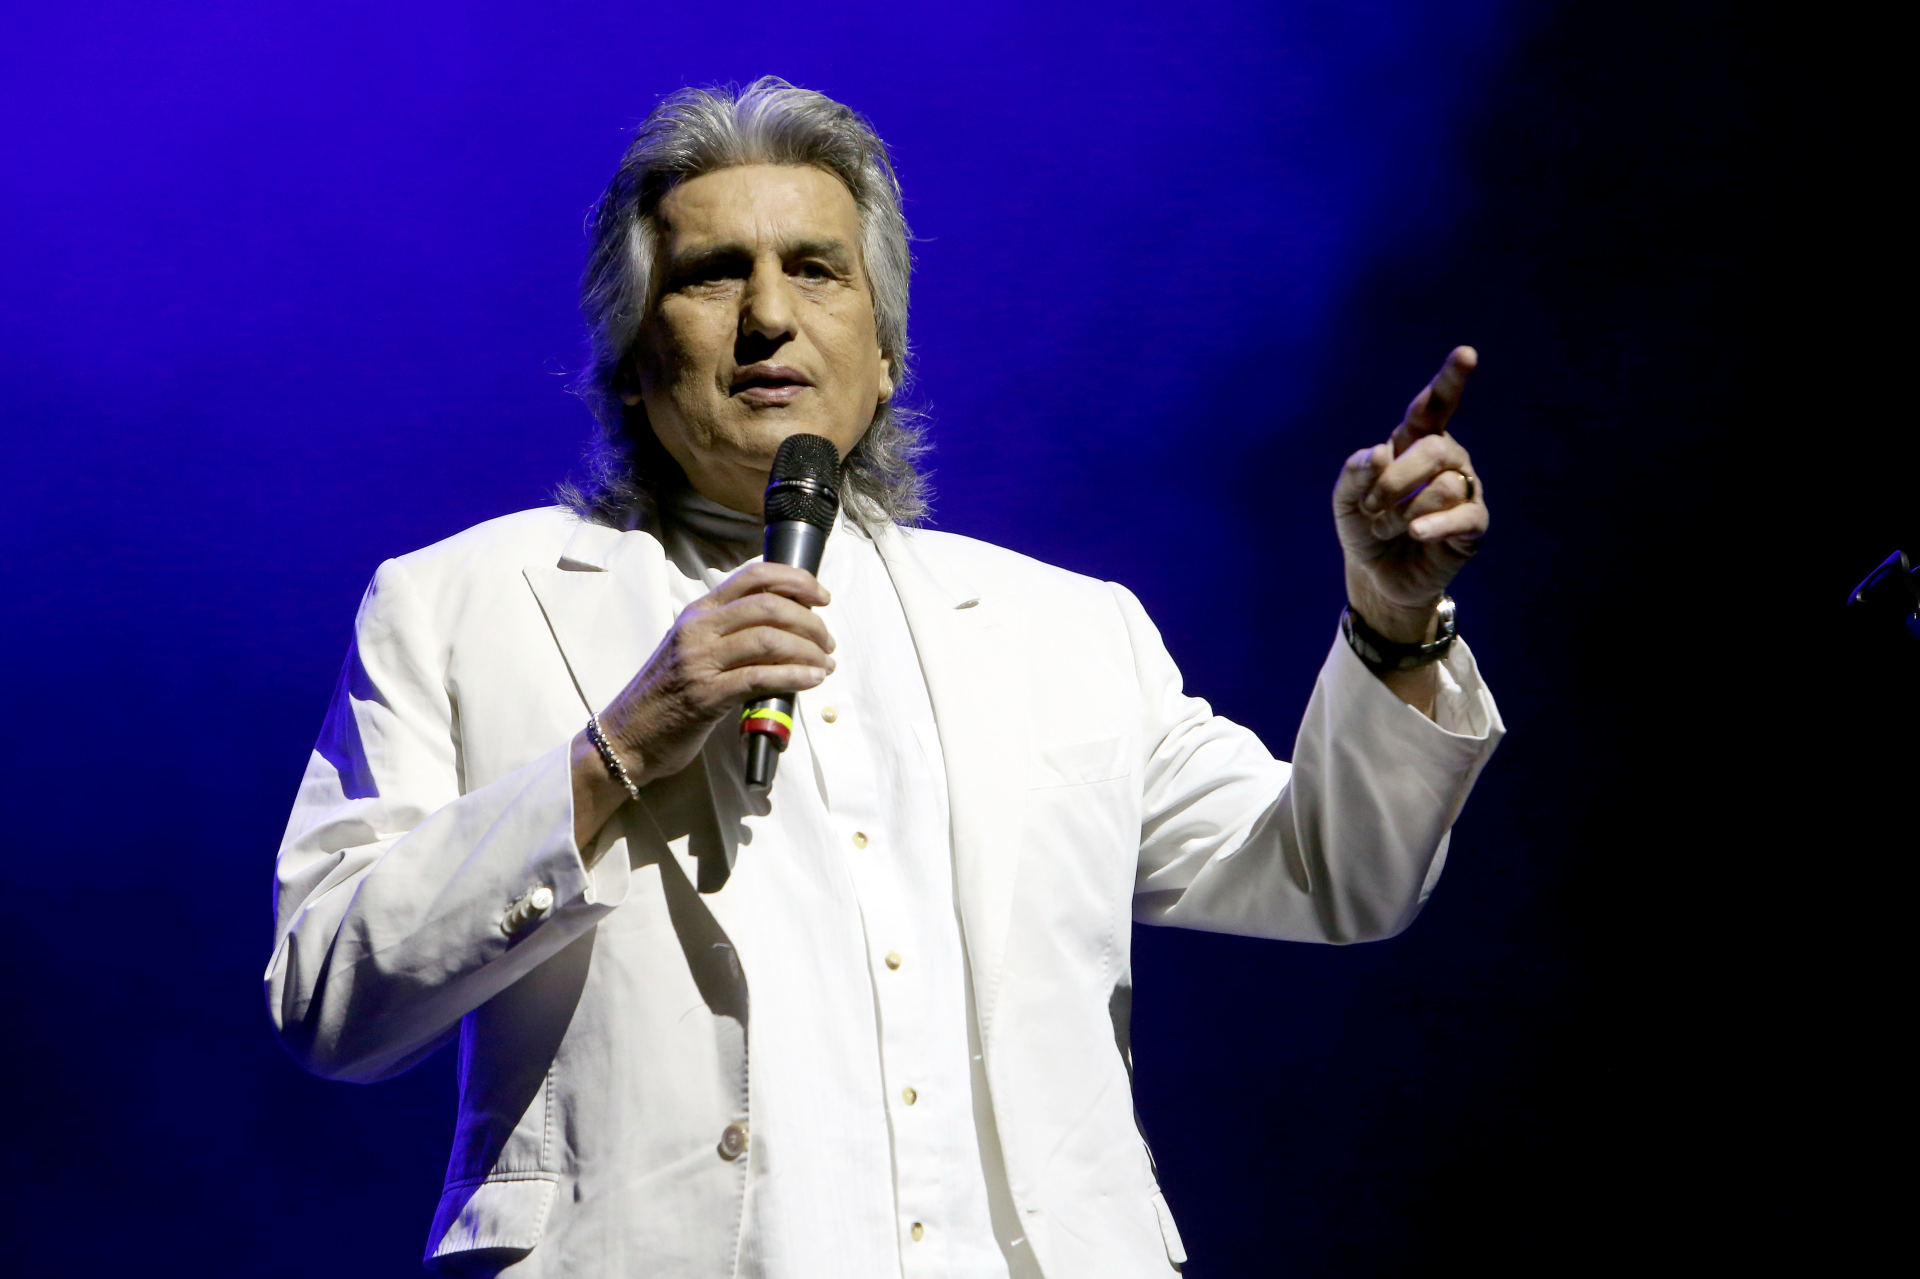 Toto Cutugno Wallpapers (8+ images inside)